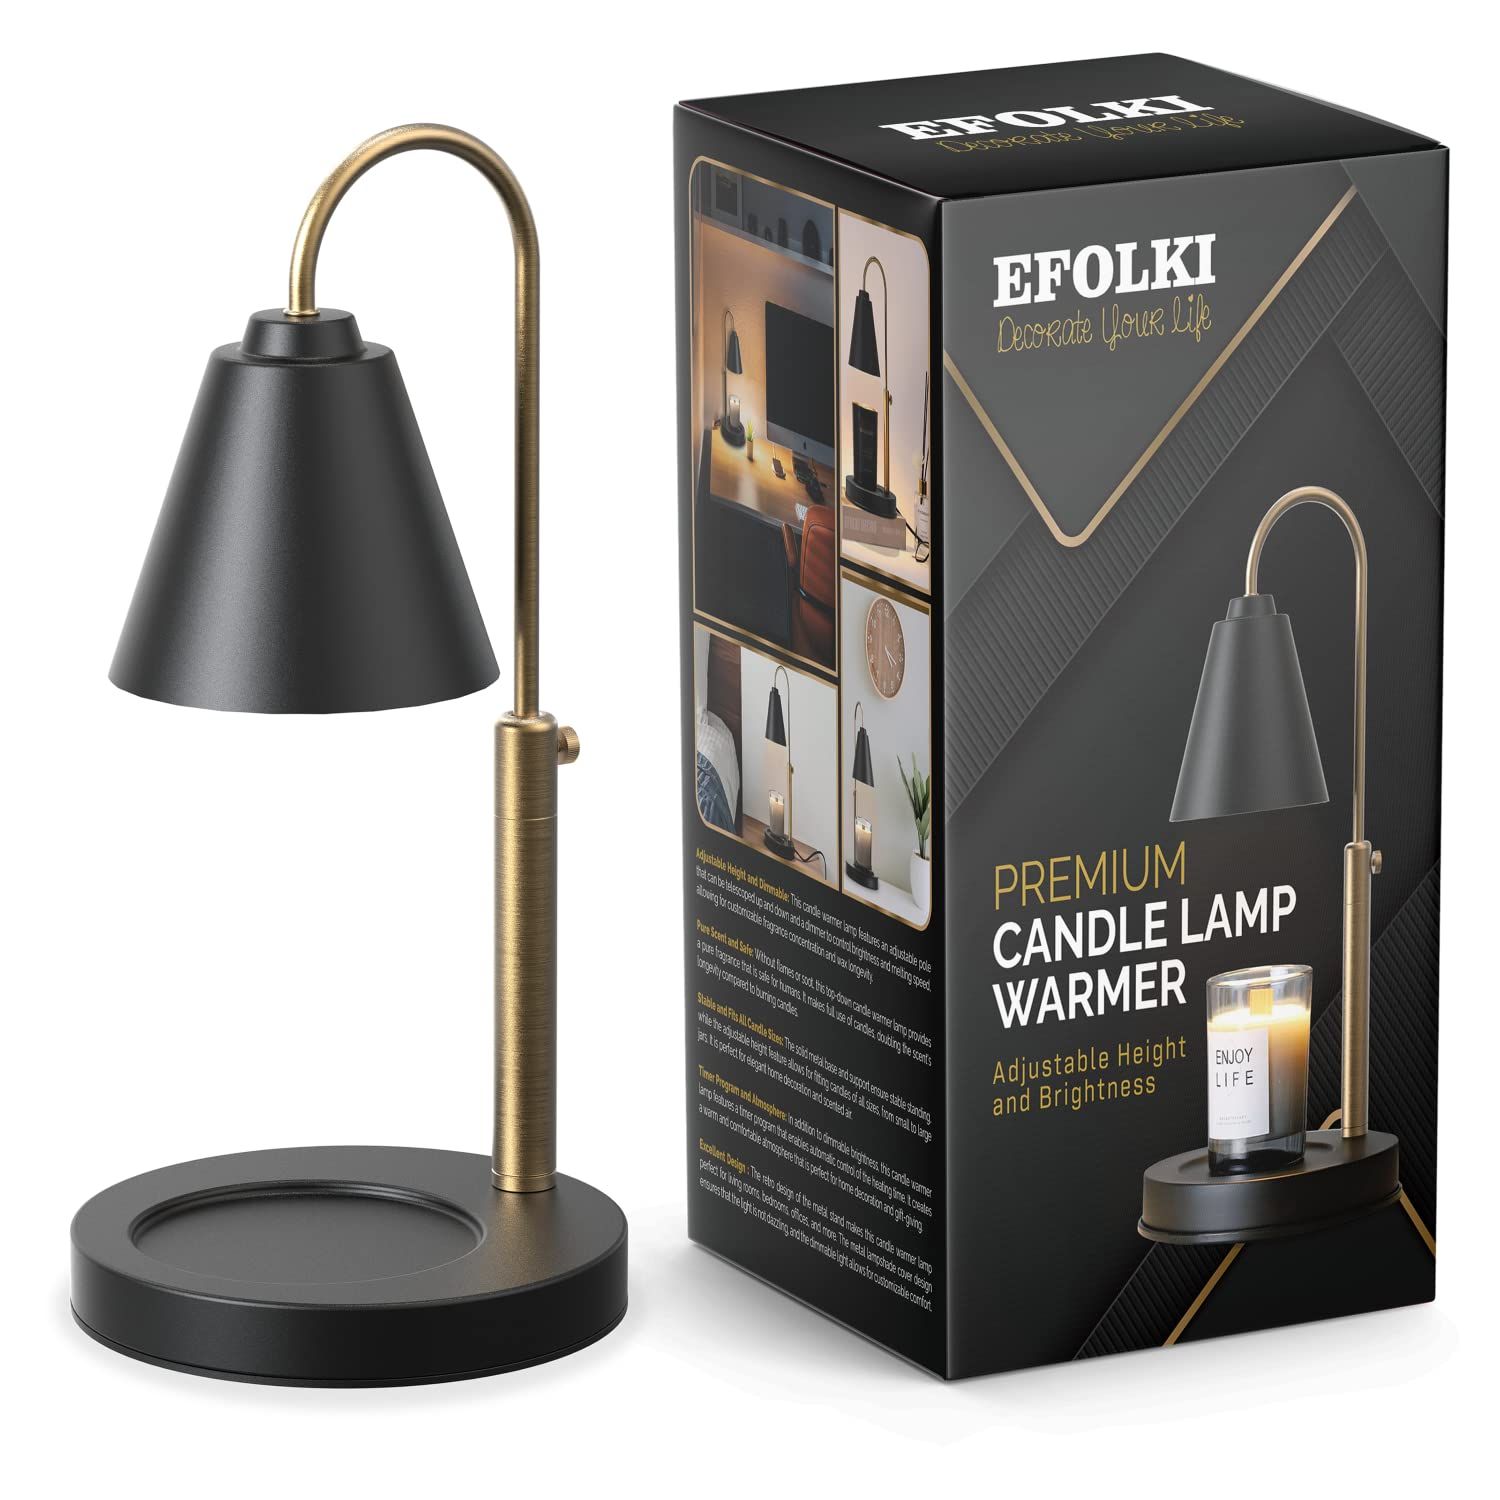 EFOLKI Candle Warmer Lamp with 2 Bulbs, Electric Candle Lamp Dimmable, Top Melting for Scented Wax,  | Amazon (US)